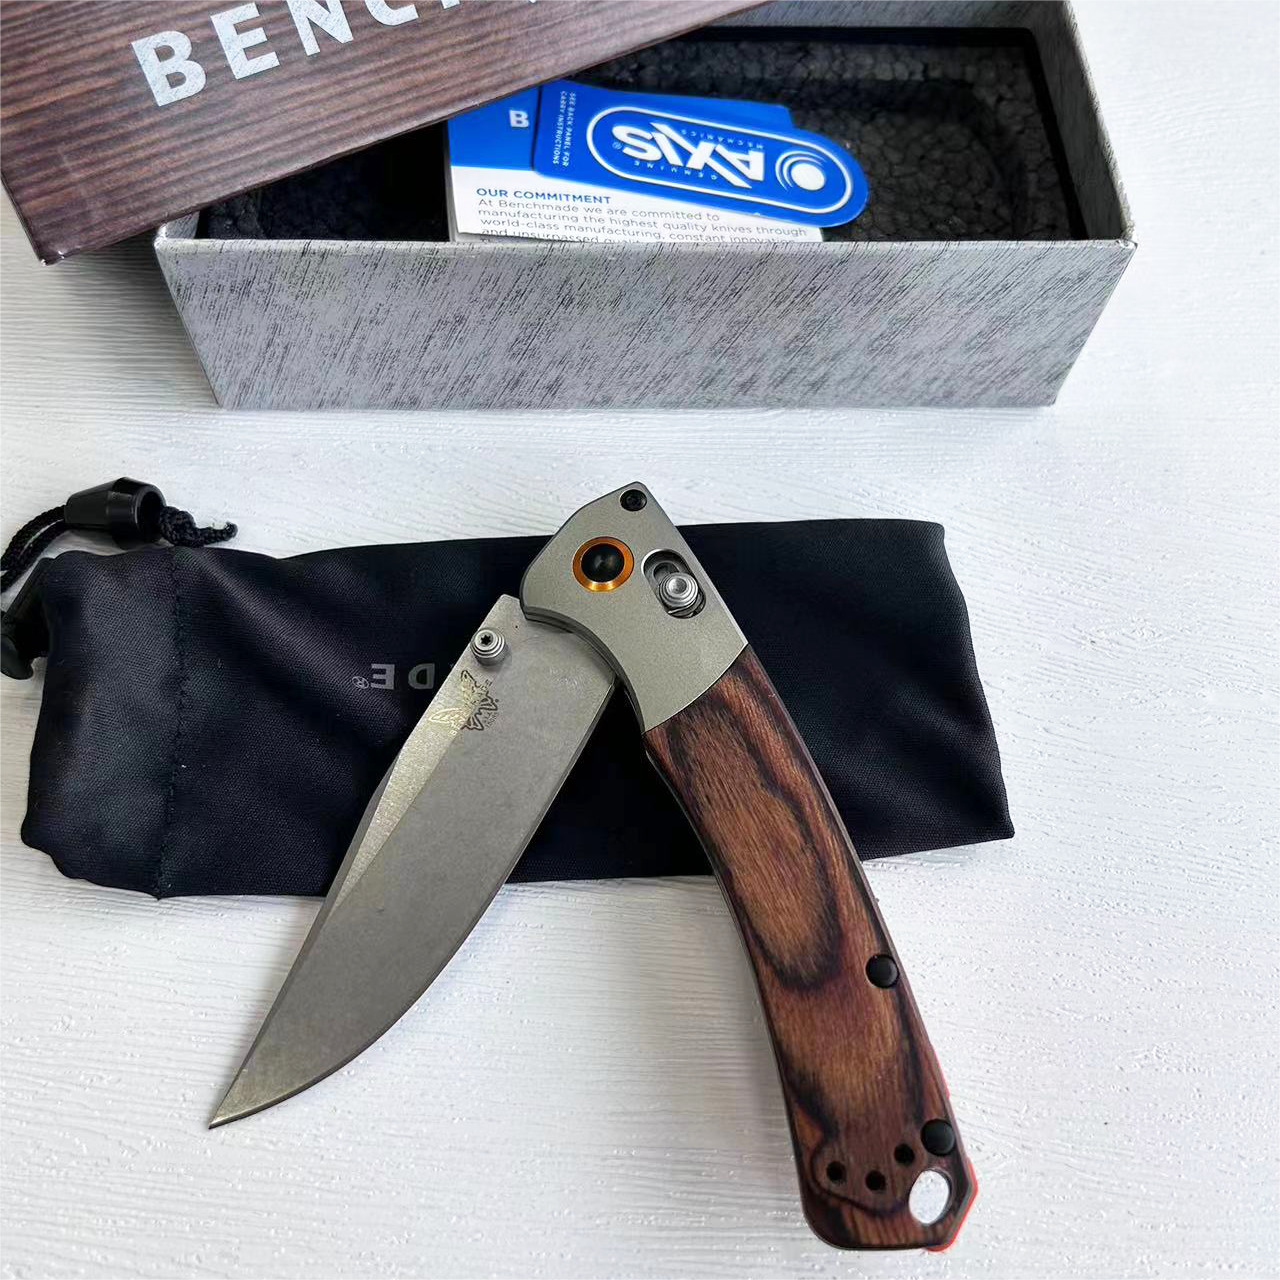 New BENCHMADE 15085-2 Mini Crooked River CPM-S30V Blade Clip-Point Folding Knife